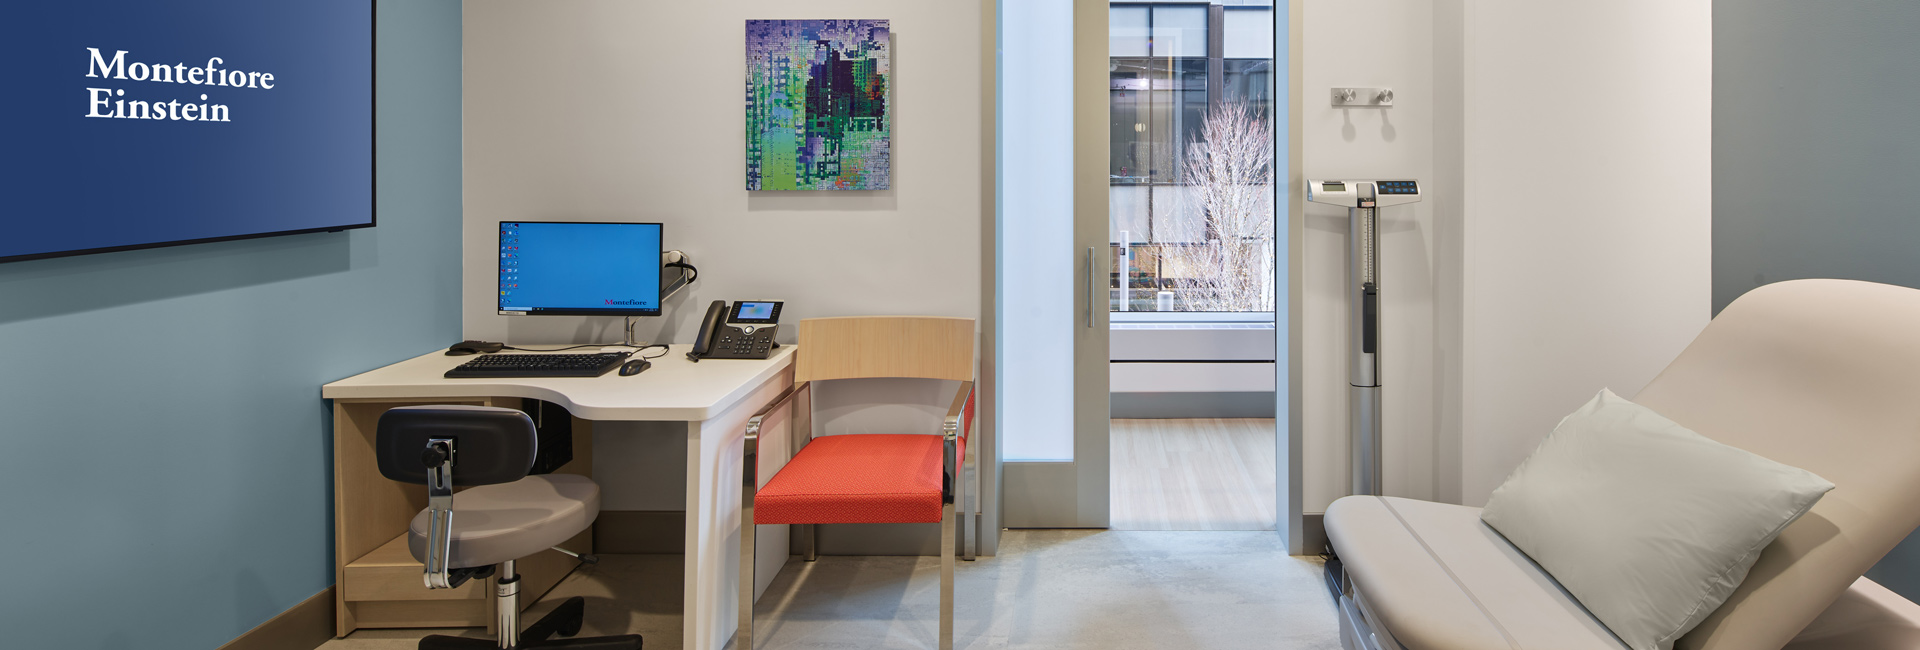 LF Driscoll Healthcare provided preconstruction and construction services for Montefiore’s new multidisciplinary ambulatory suite at the newly built 2 Manhattan West.